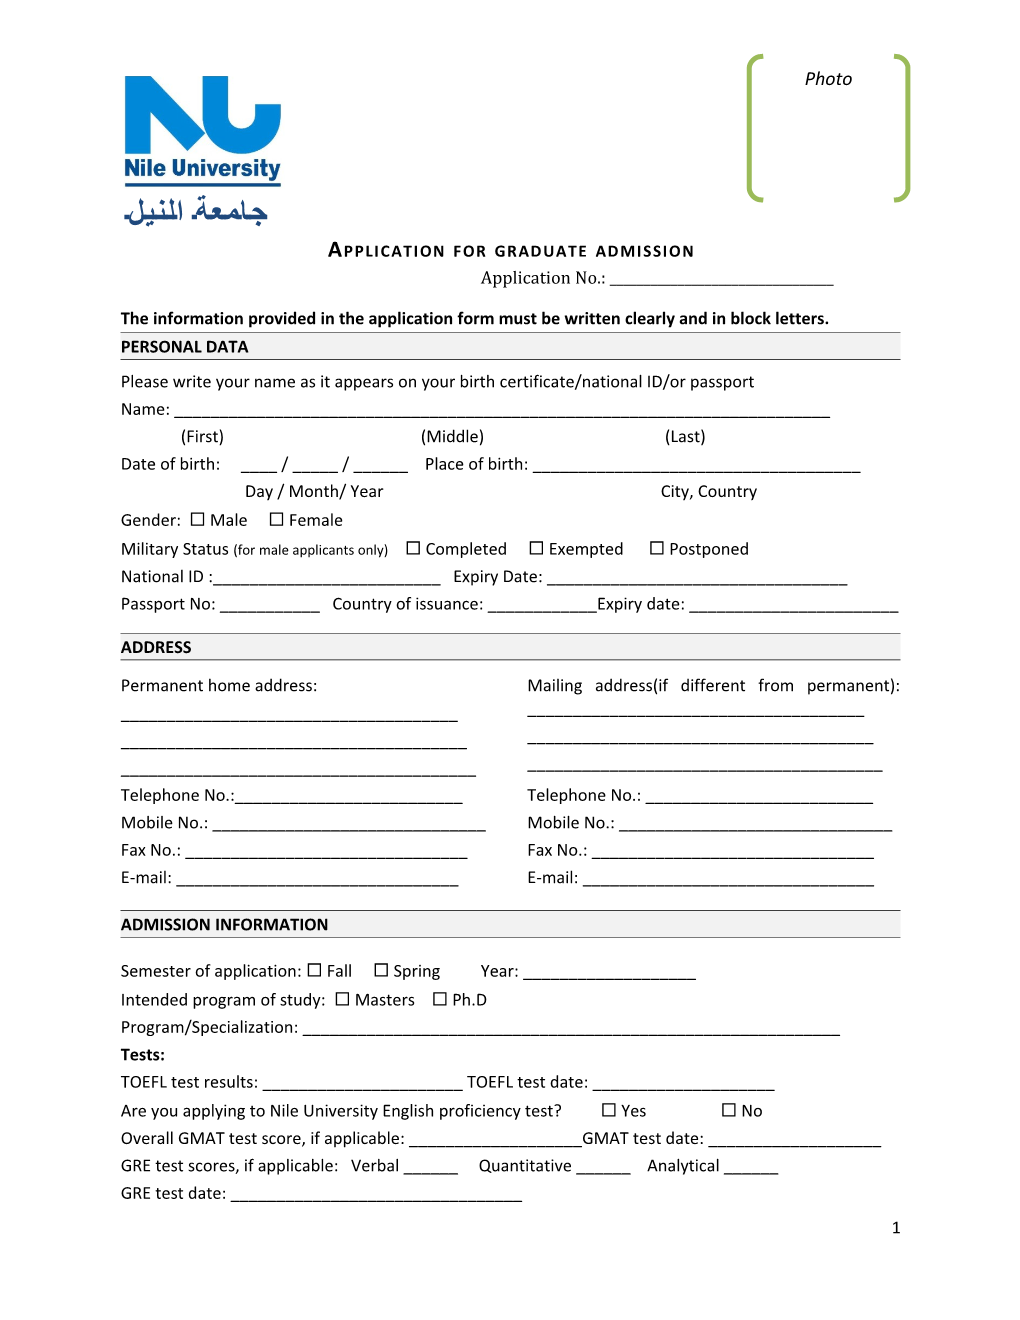 Application for Graduate Admission